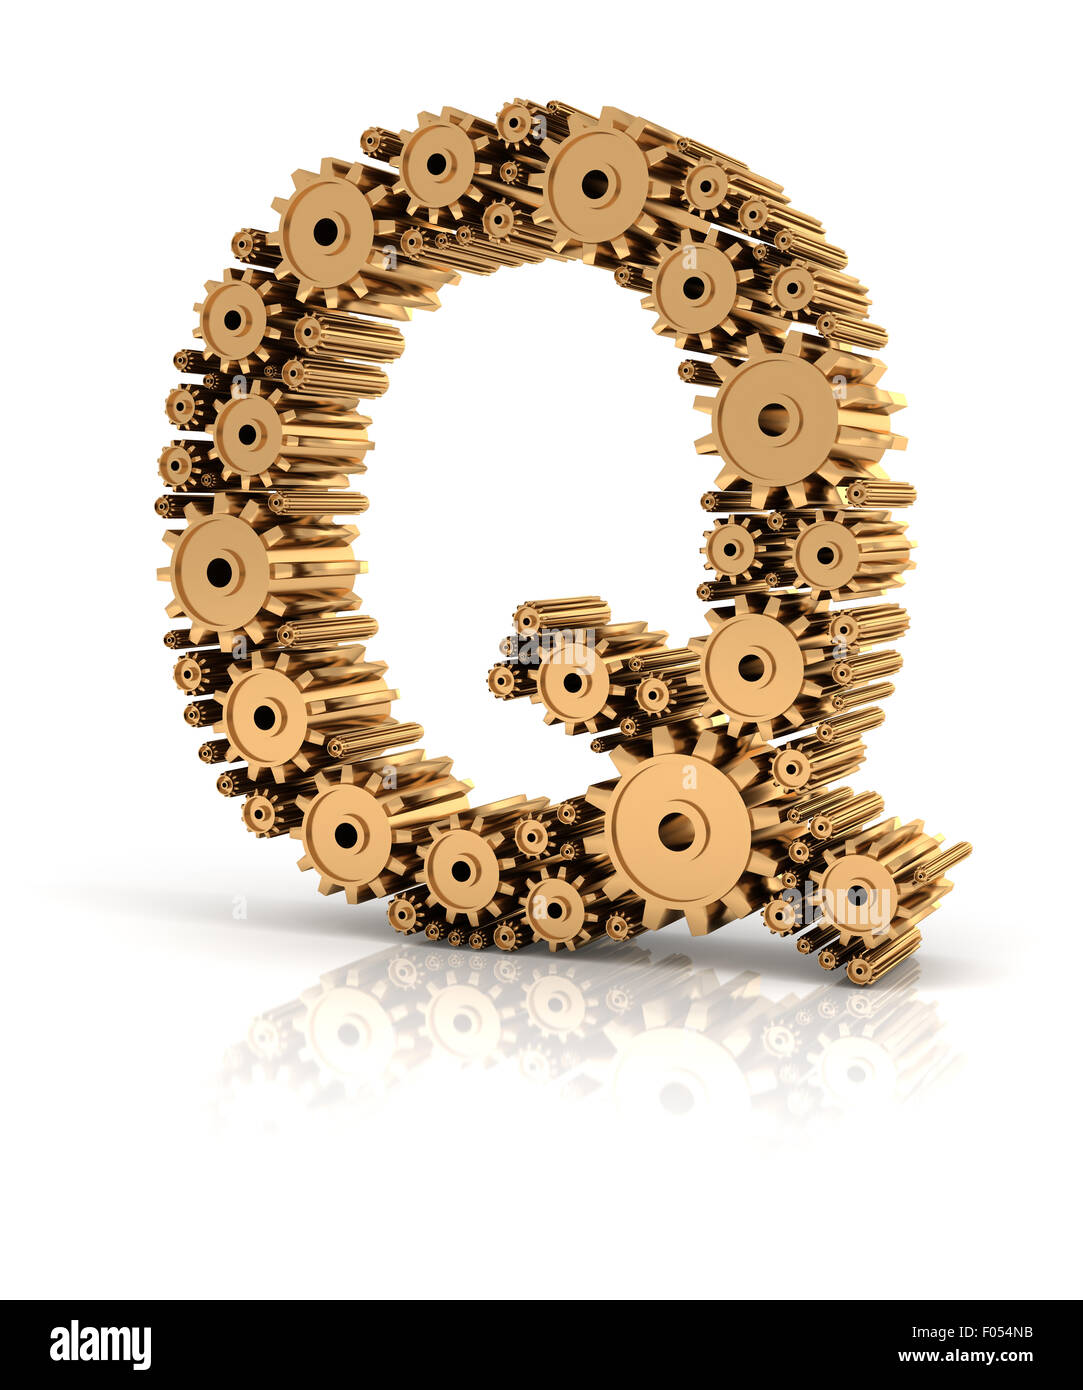 Alphabet Q formed by gears Stock Photo